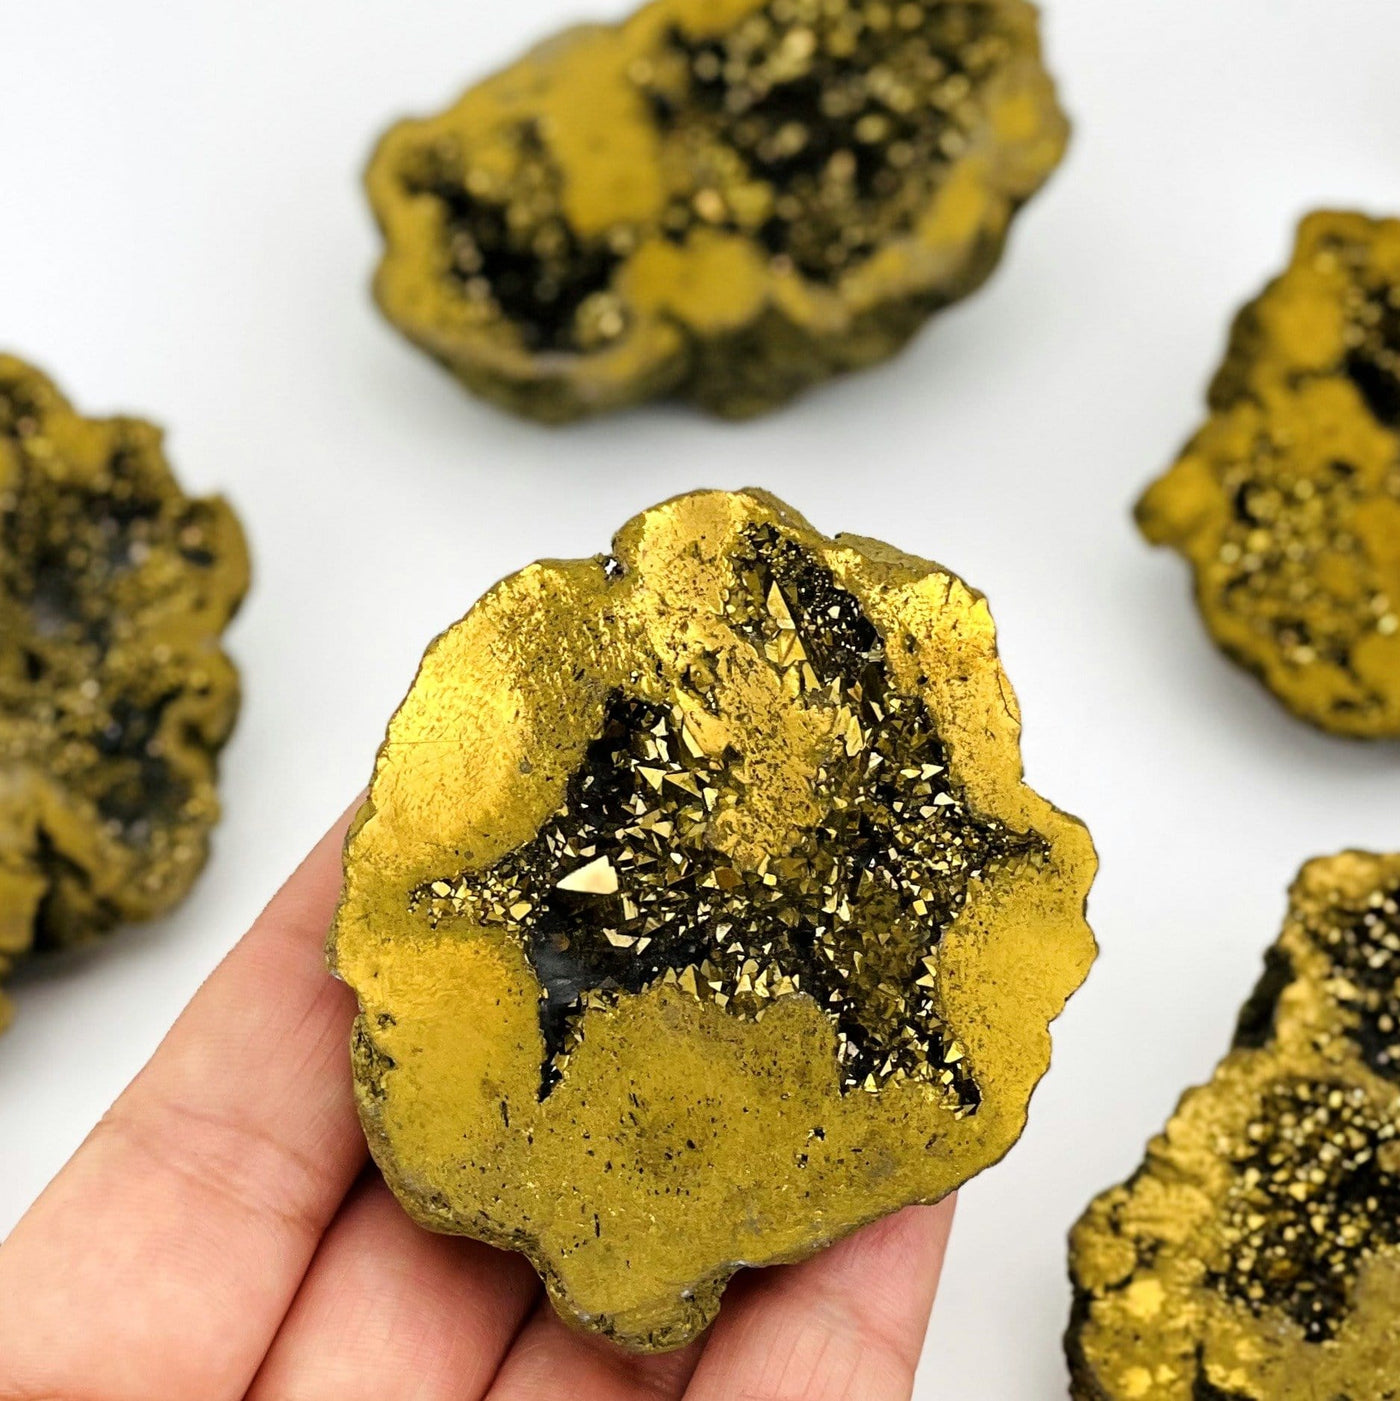 Gold Half Geode close up in hand with a few in background for size reference